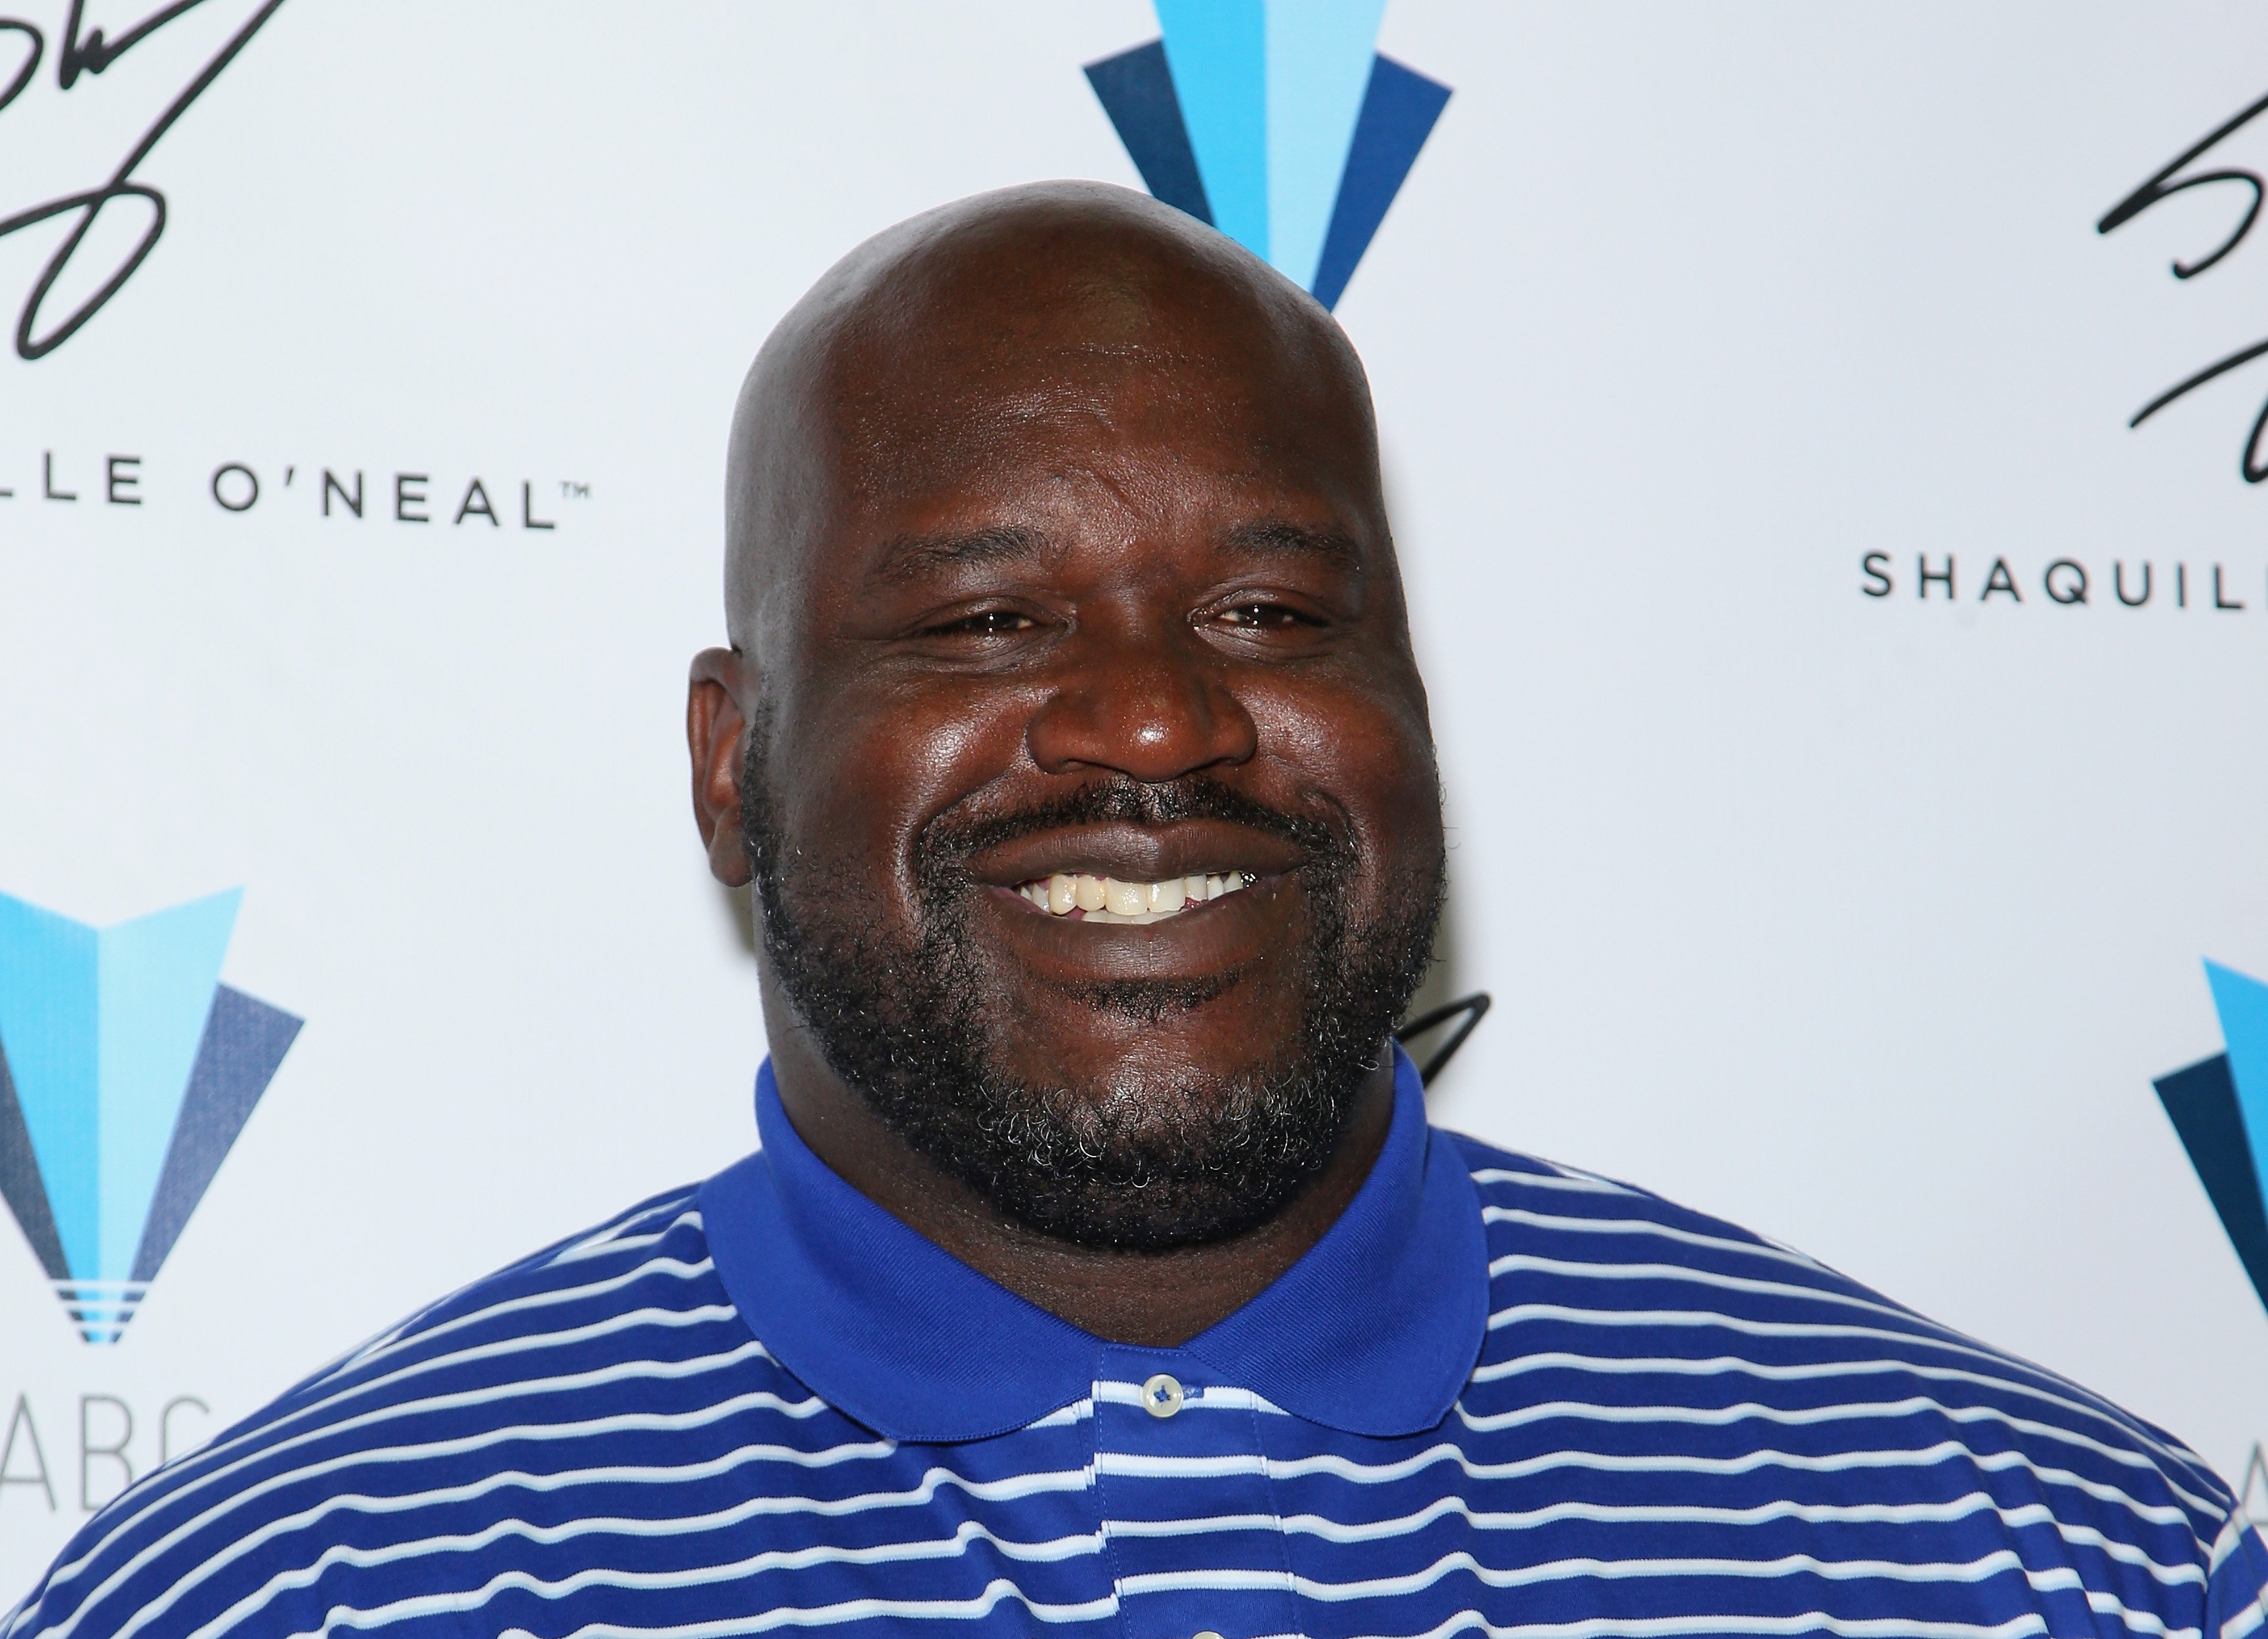  Former NBA player Shaquille O'Neal poses in the Authentic Brands Group booth during the Licensing Expo 2016 at the Mandalay Bay Convention Center on June 21, 2016 | Photo: Getty Images